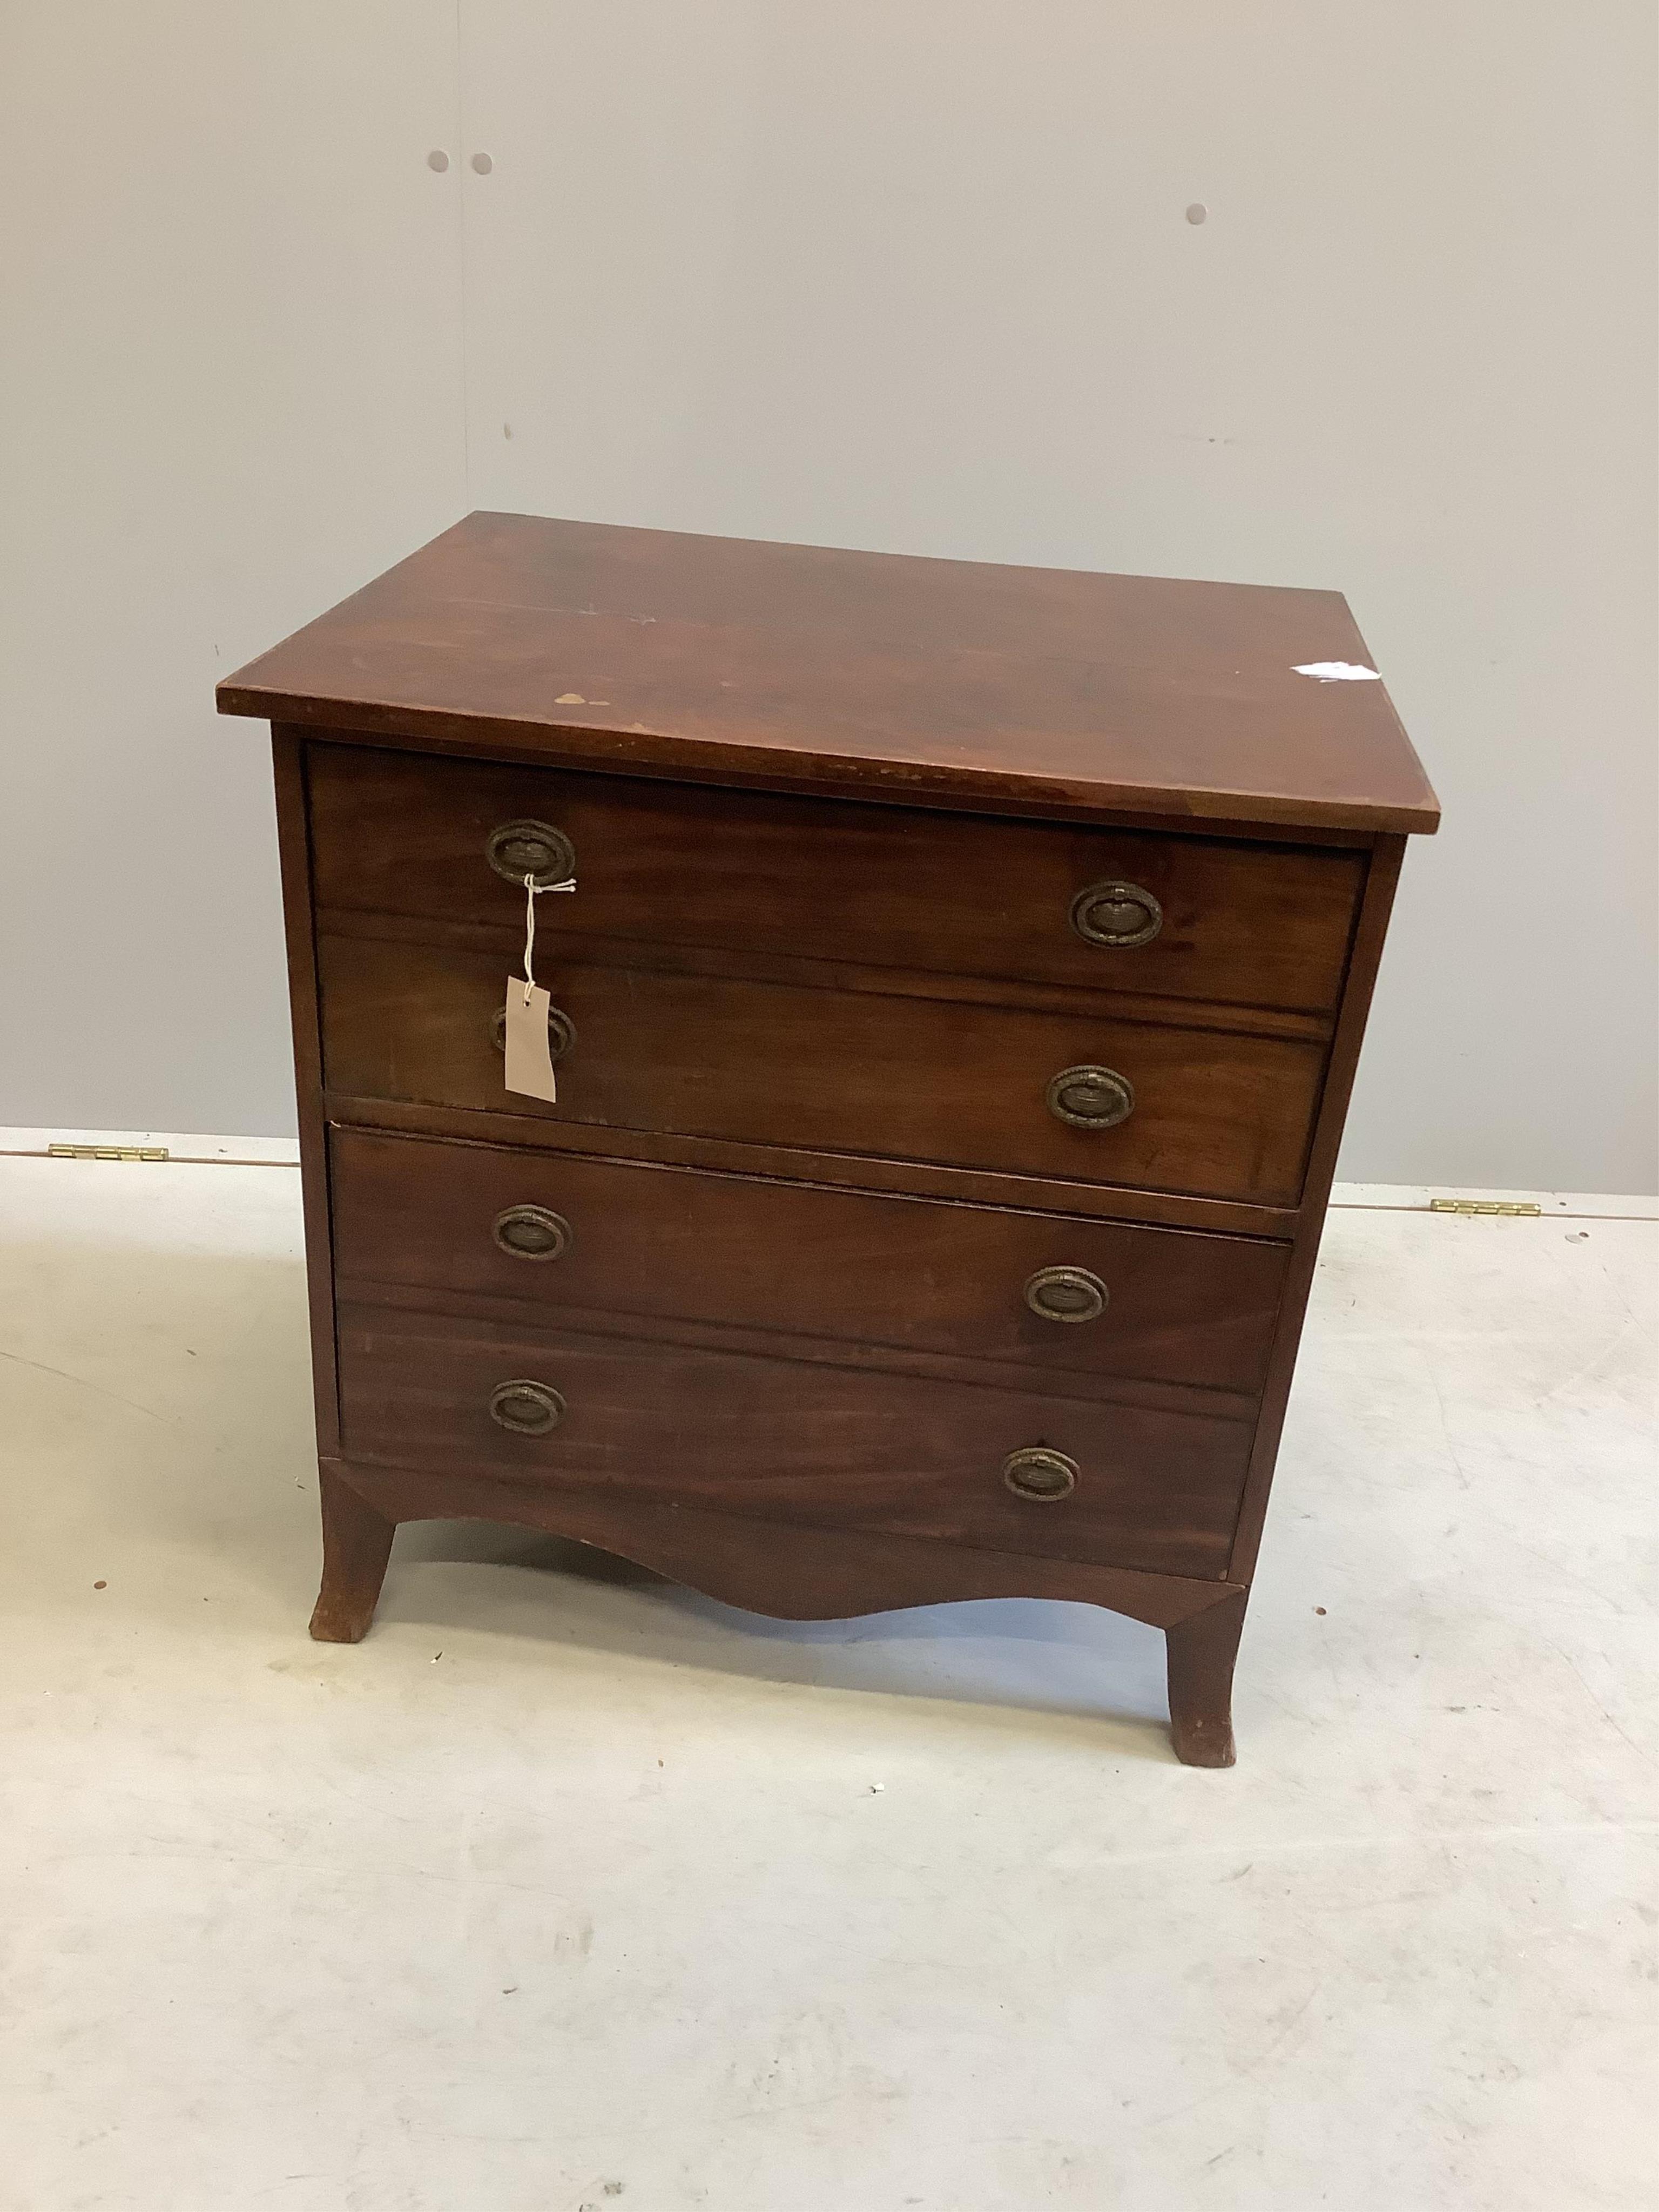 A small 19th century mahogany chest of two drawers, (adapted), width 63cm, depth 48cm, height 68cm. Condition - poor